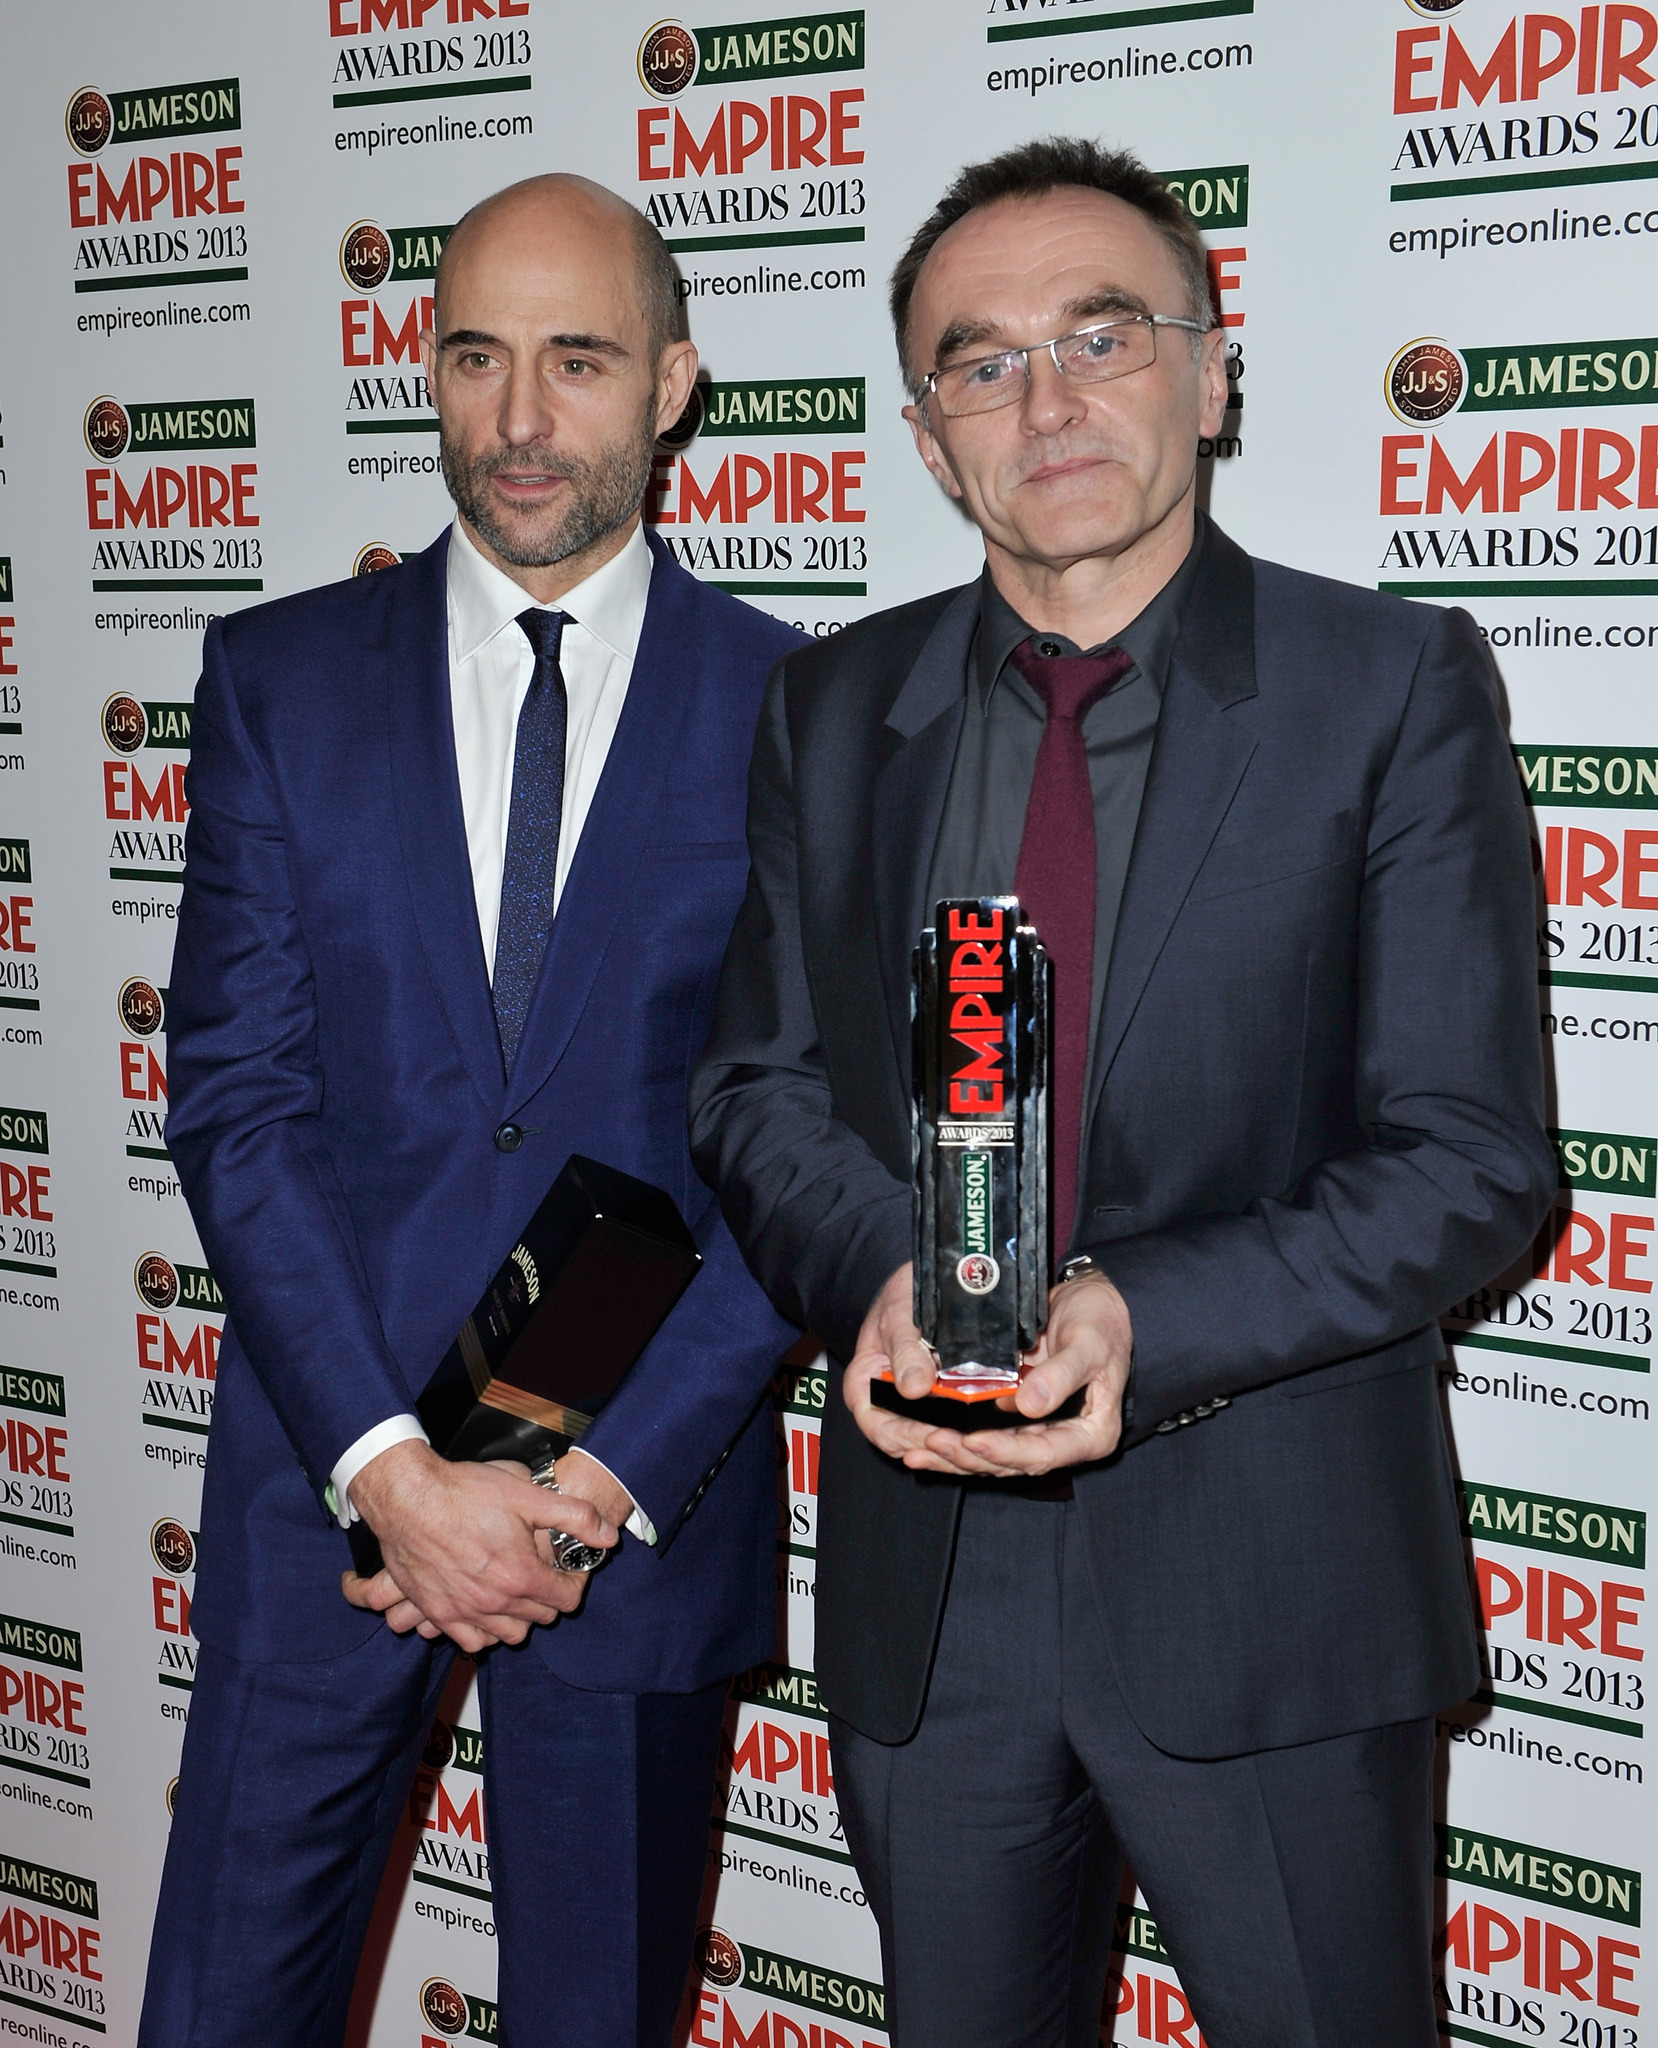 Danny Boyle and Mark Strong